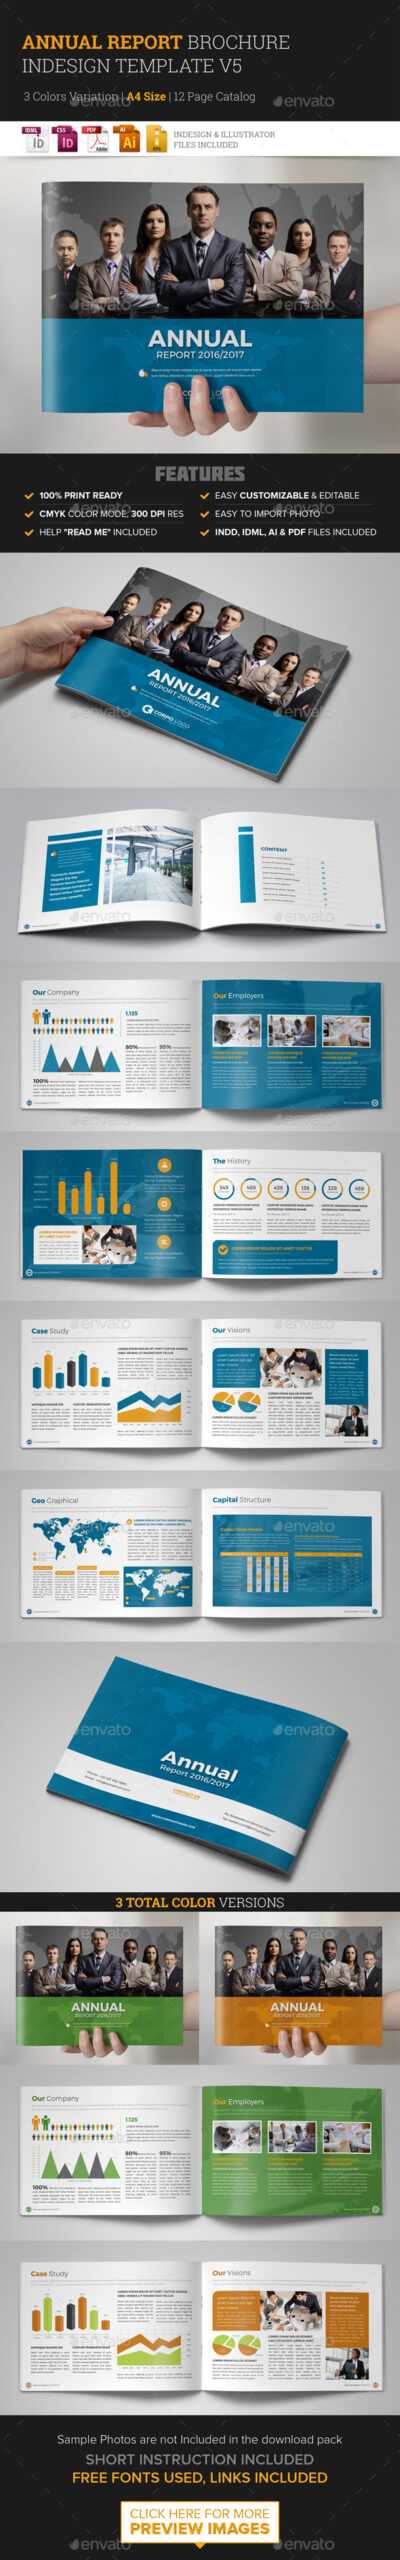 Annual Report Template Indesign Graphics, Designs & Templates For Free Indesign Report Templates